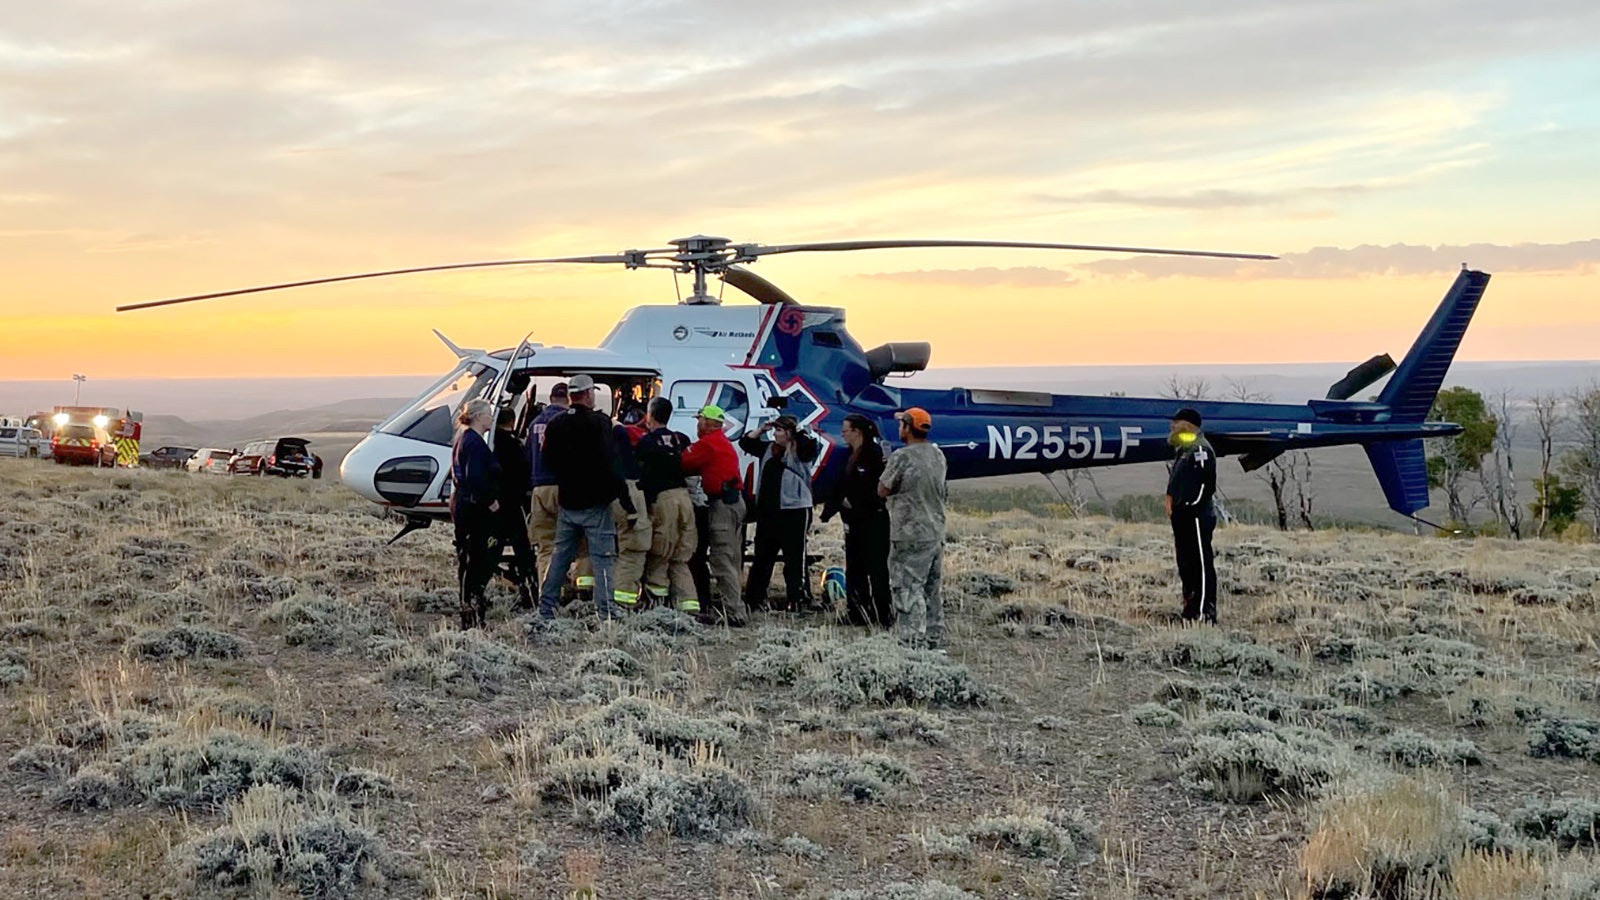 Emergency responders load a boy onto a medical helicopter early Tuesday morning after he was stranded in the Wyoming wilderness overnight with his father when their truck went off the road.